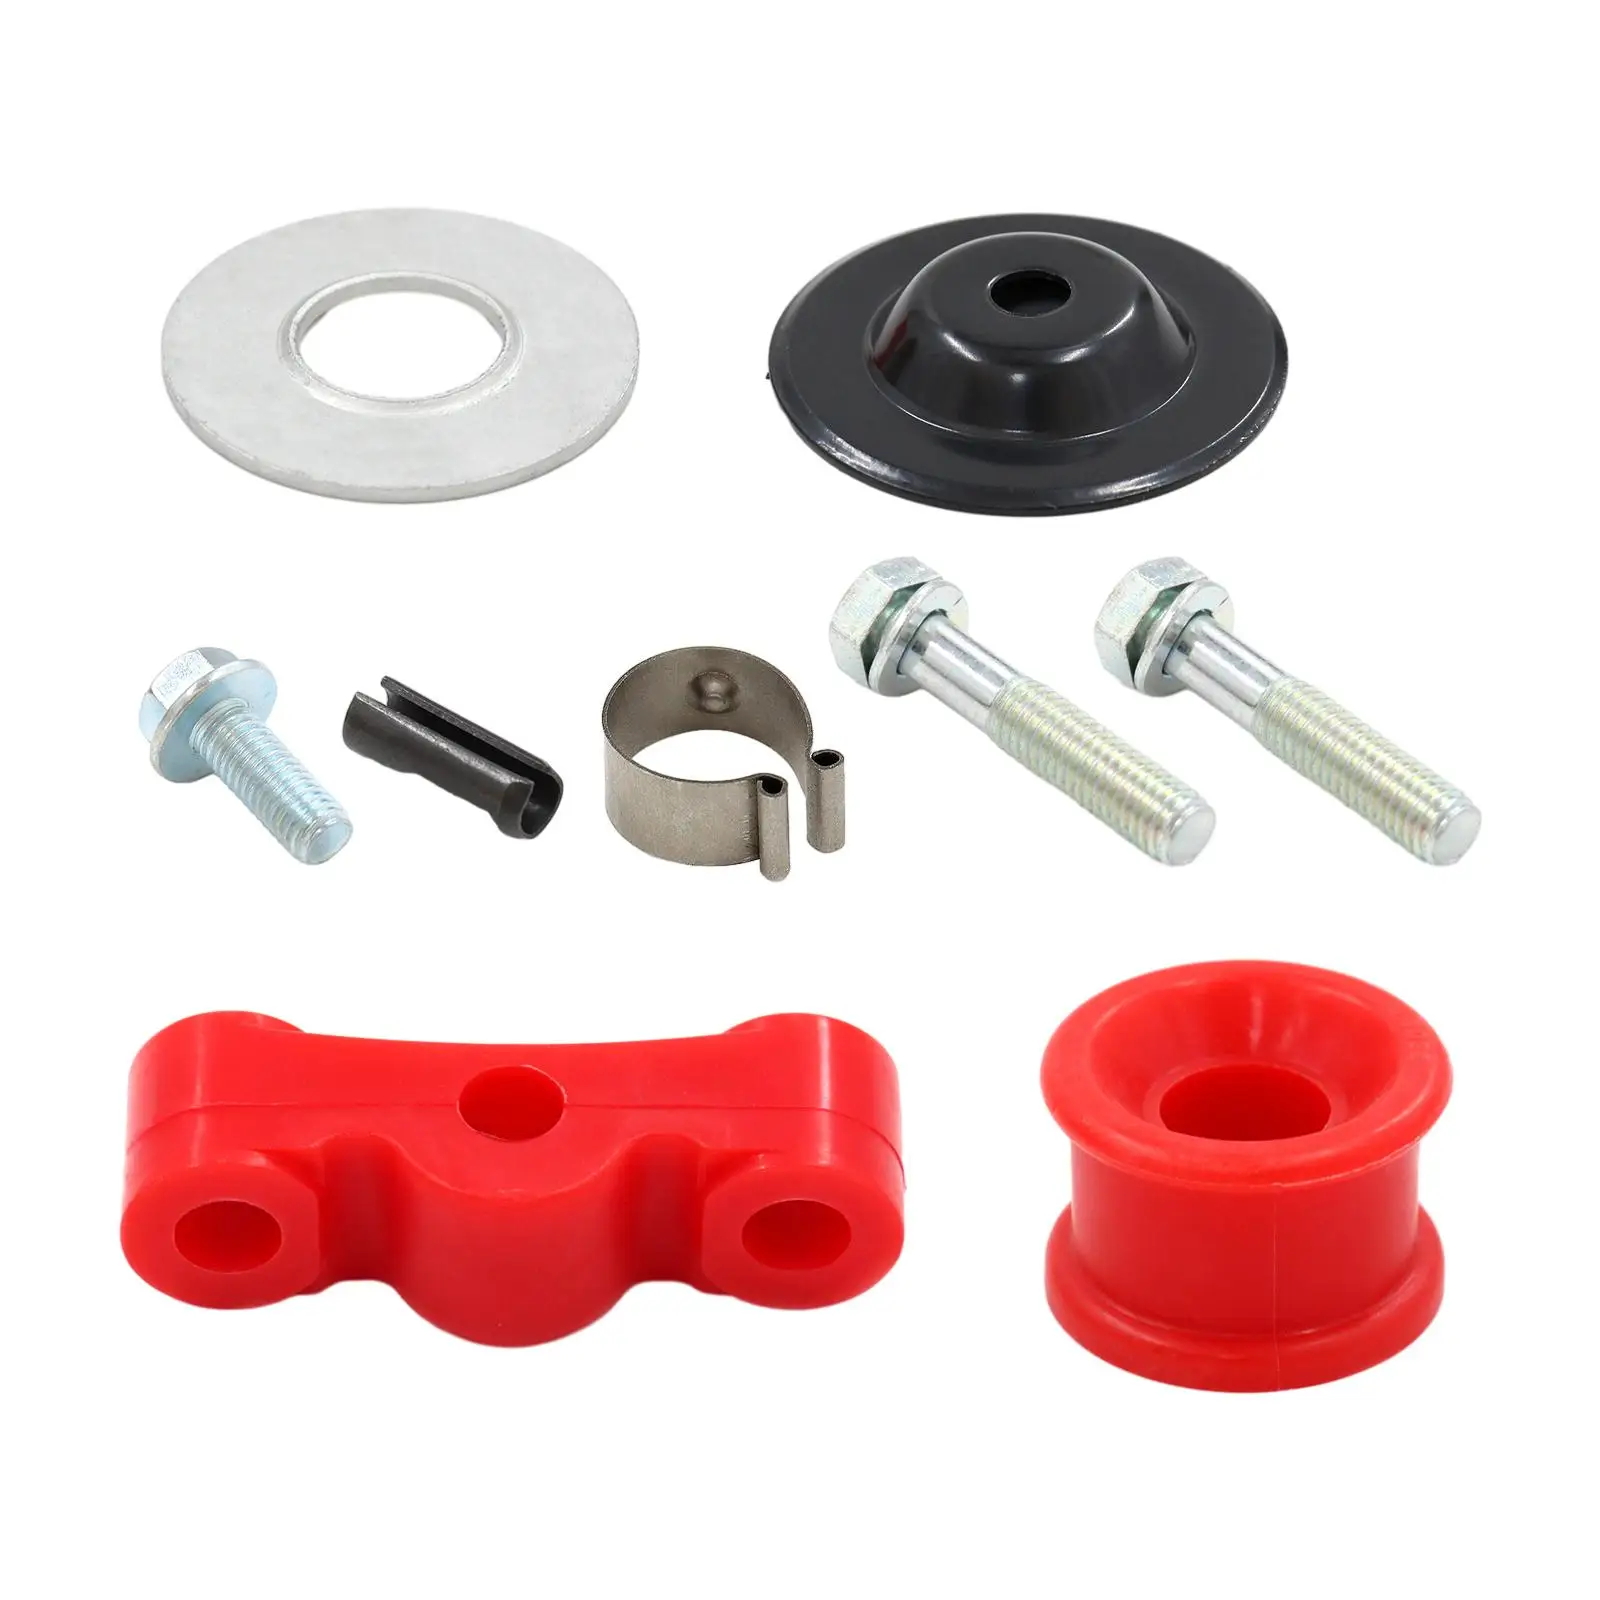 Red Shift Linkage Bushings Kit Auto Accessories for Honda Professional